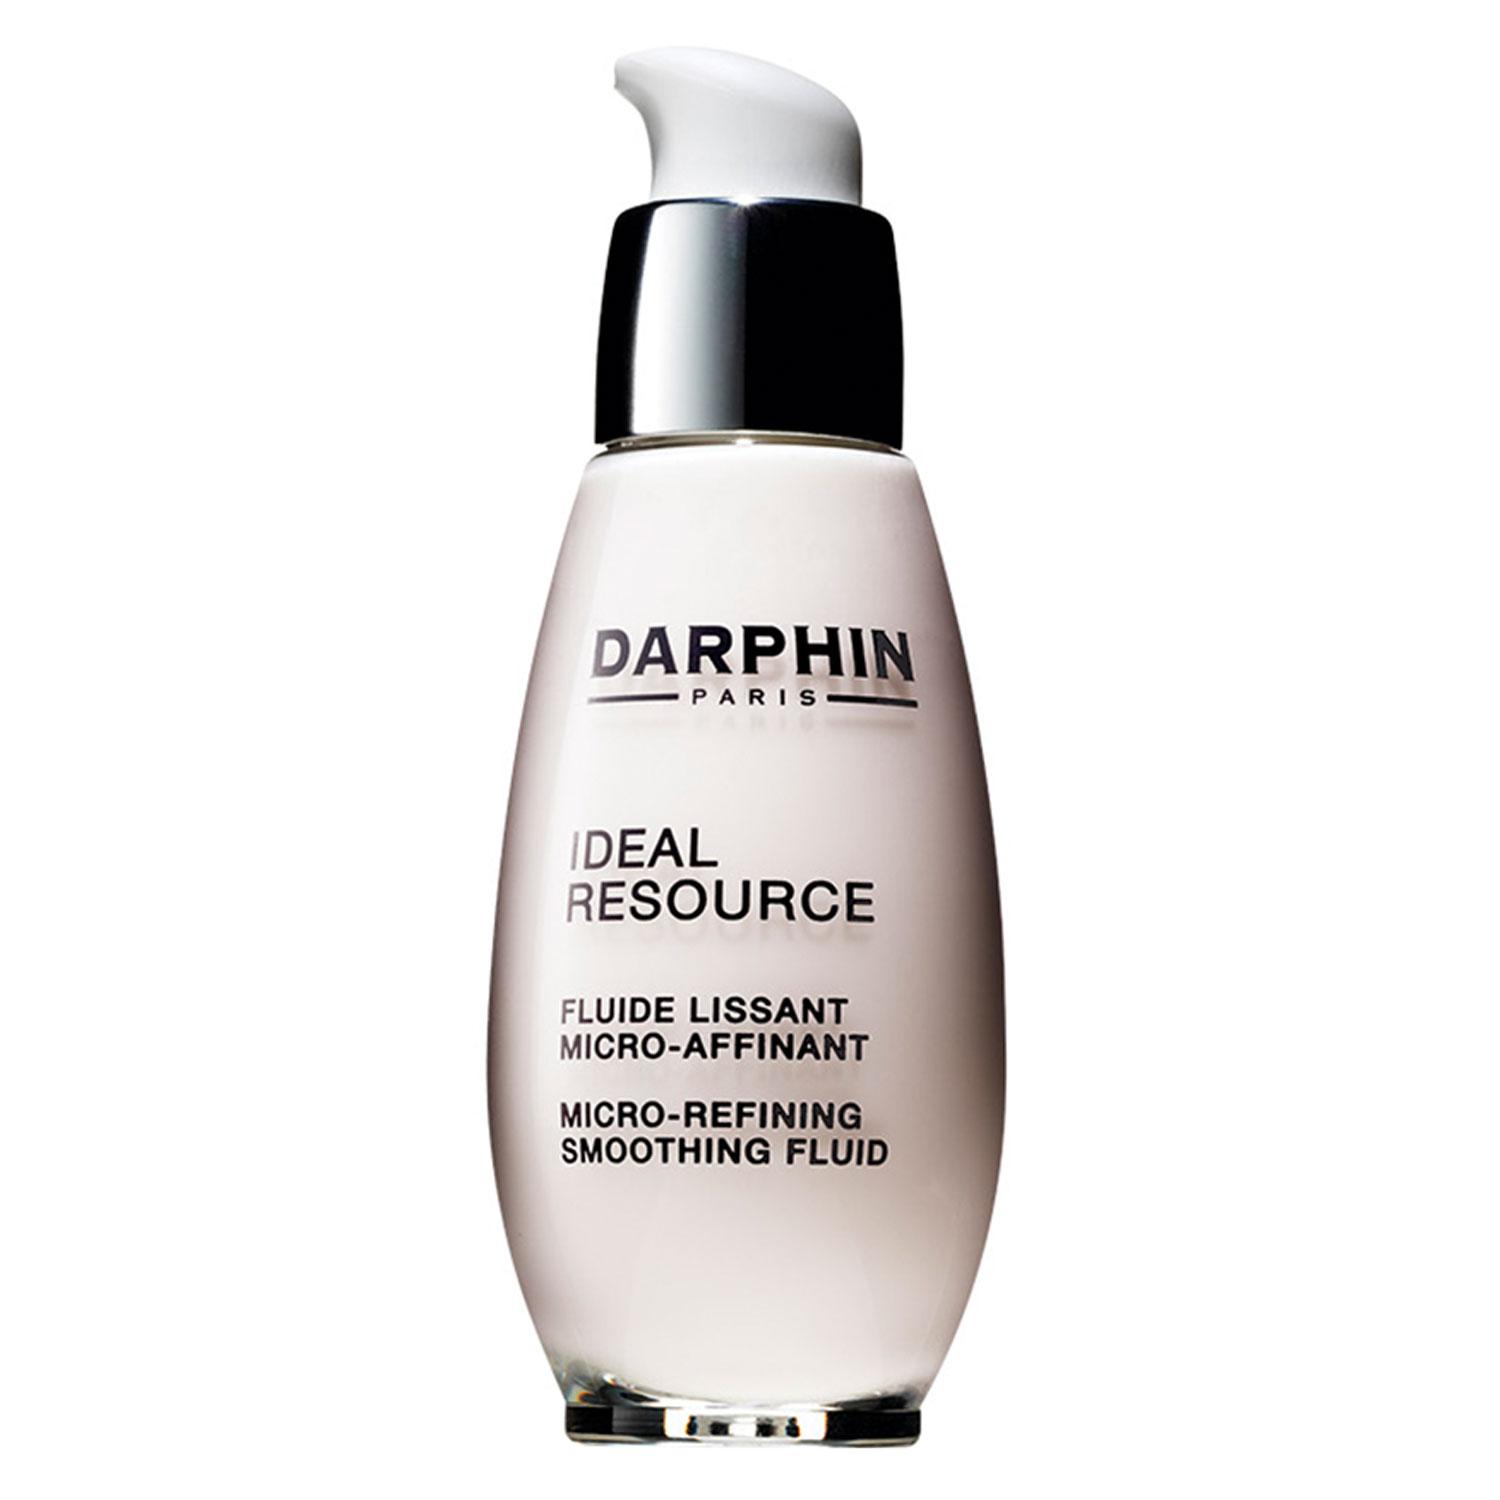 IDEAL RESOURCE - Micro-Refining Smoothing Fluid